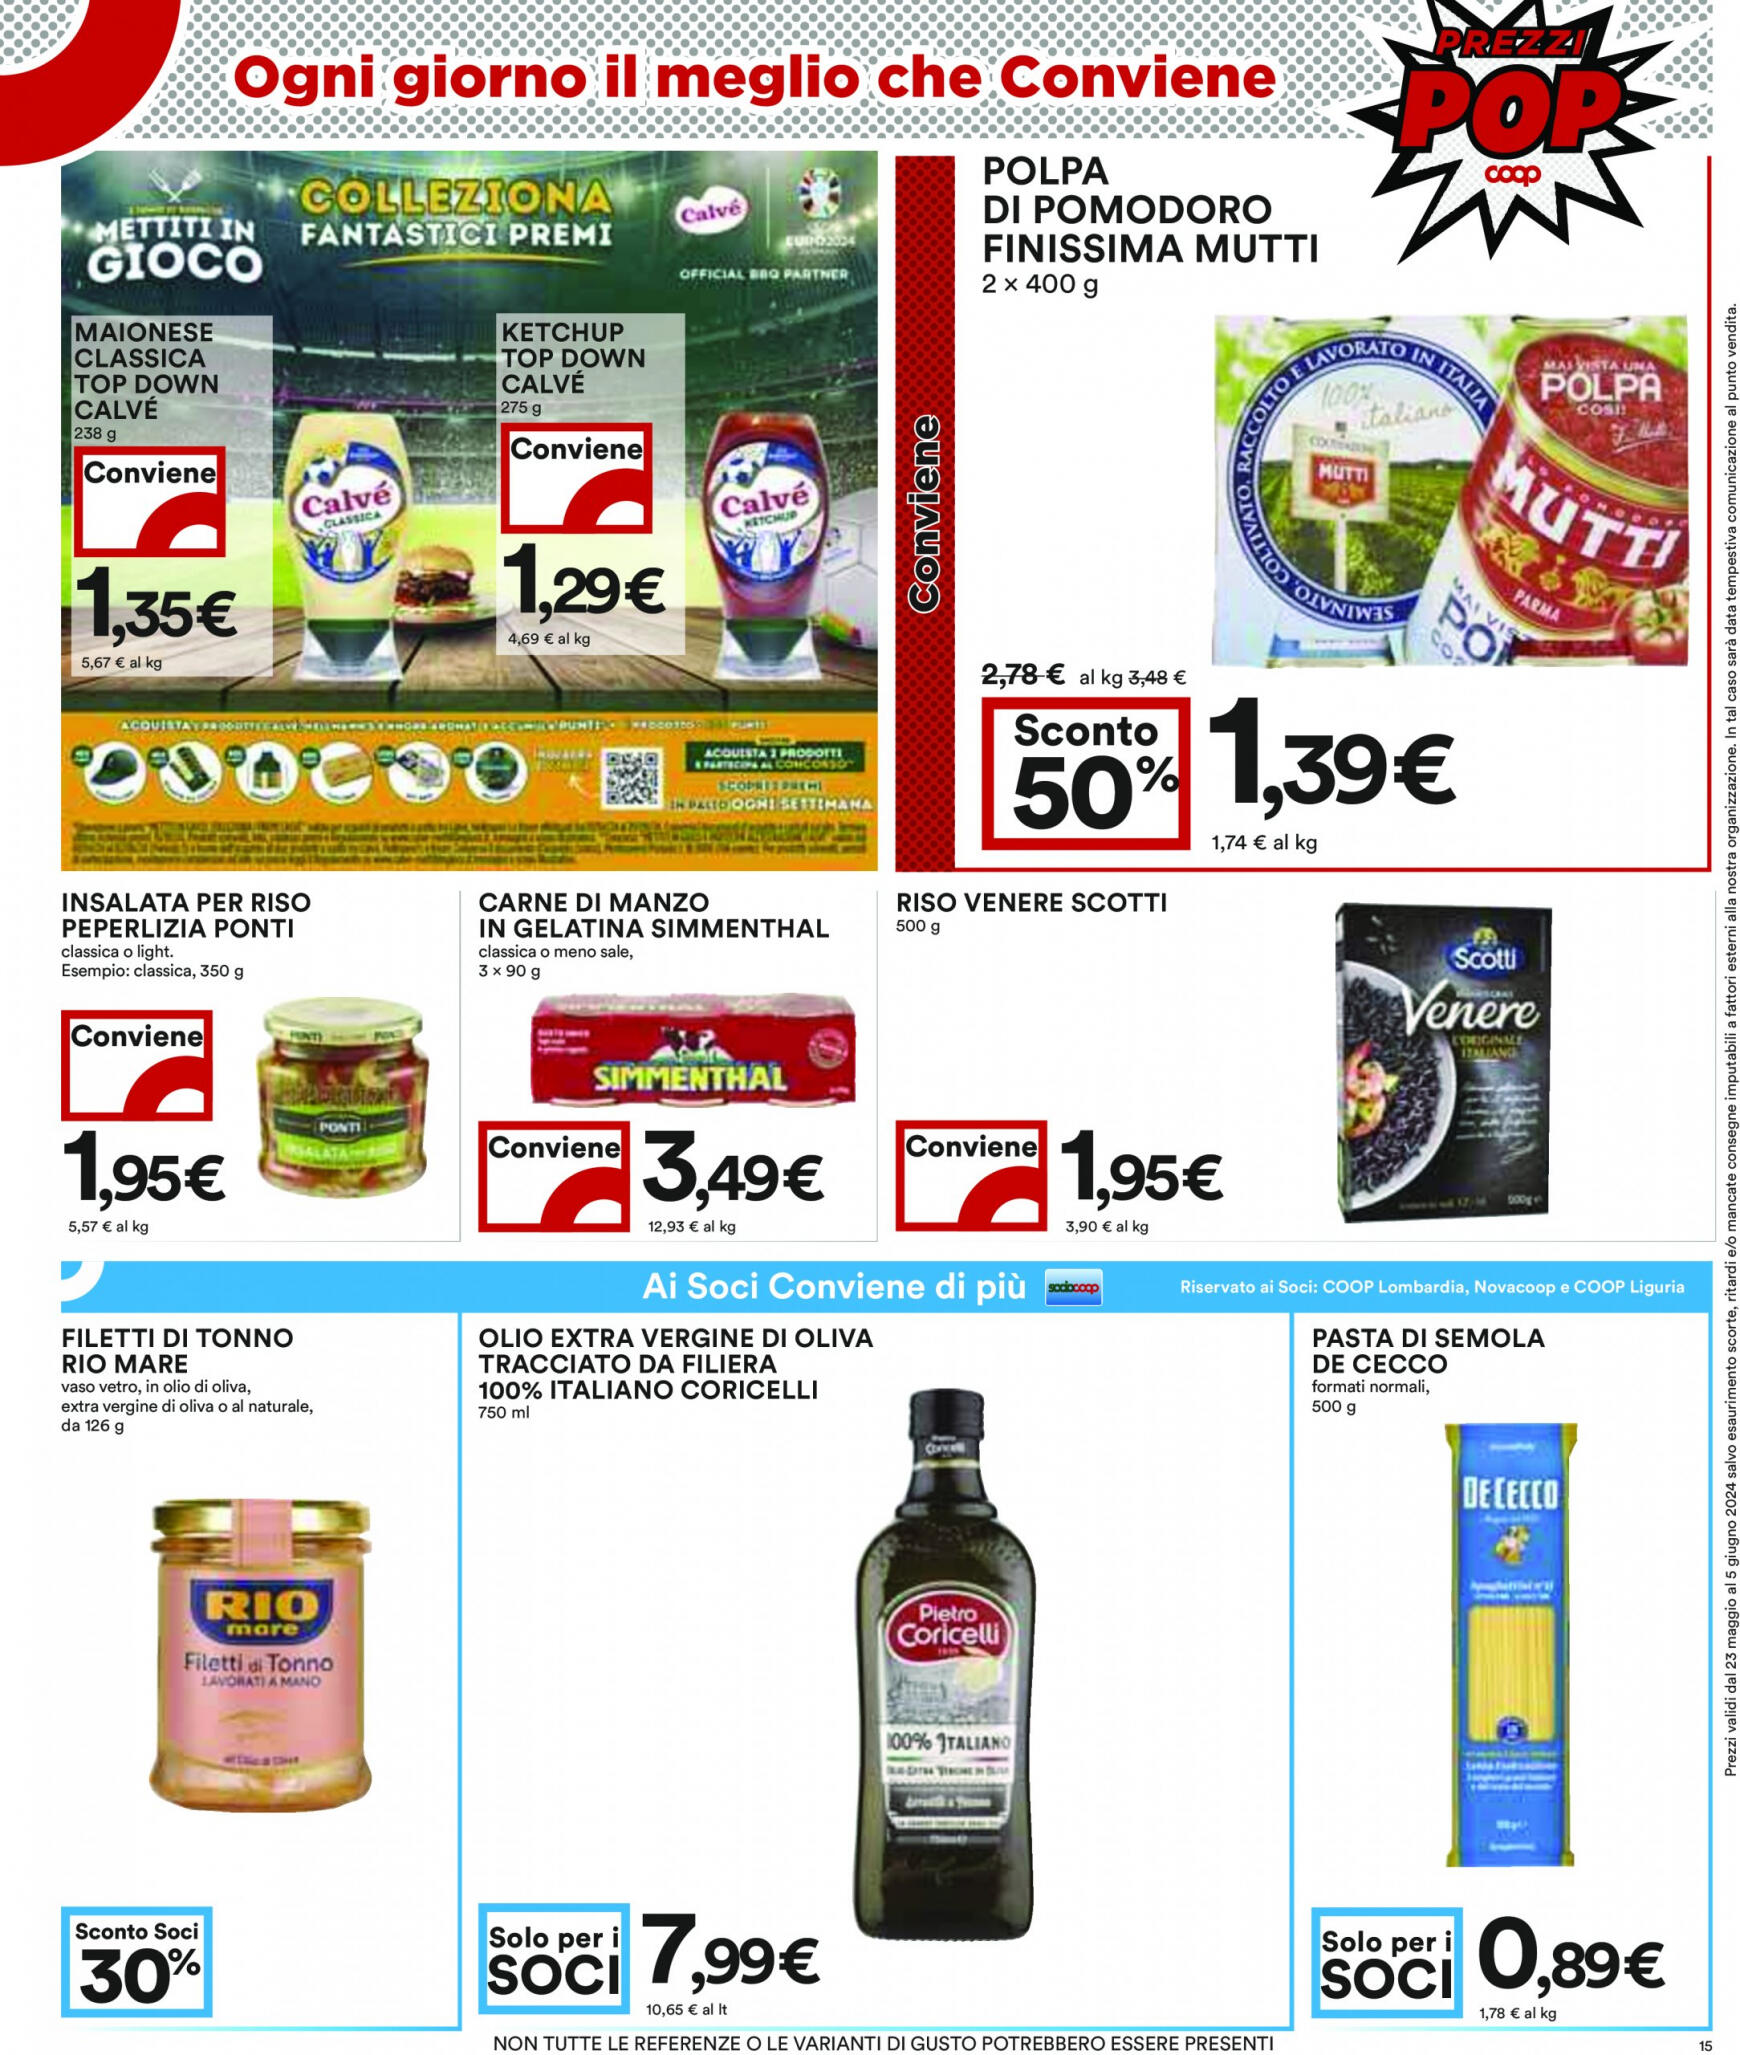 coop - Nuovo volantino Coop 23.05. - 05.06. - page: 15